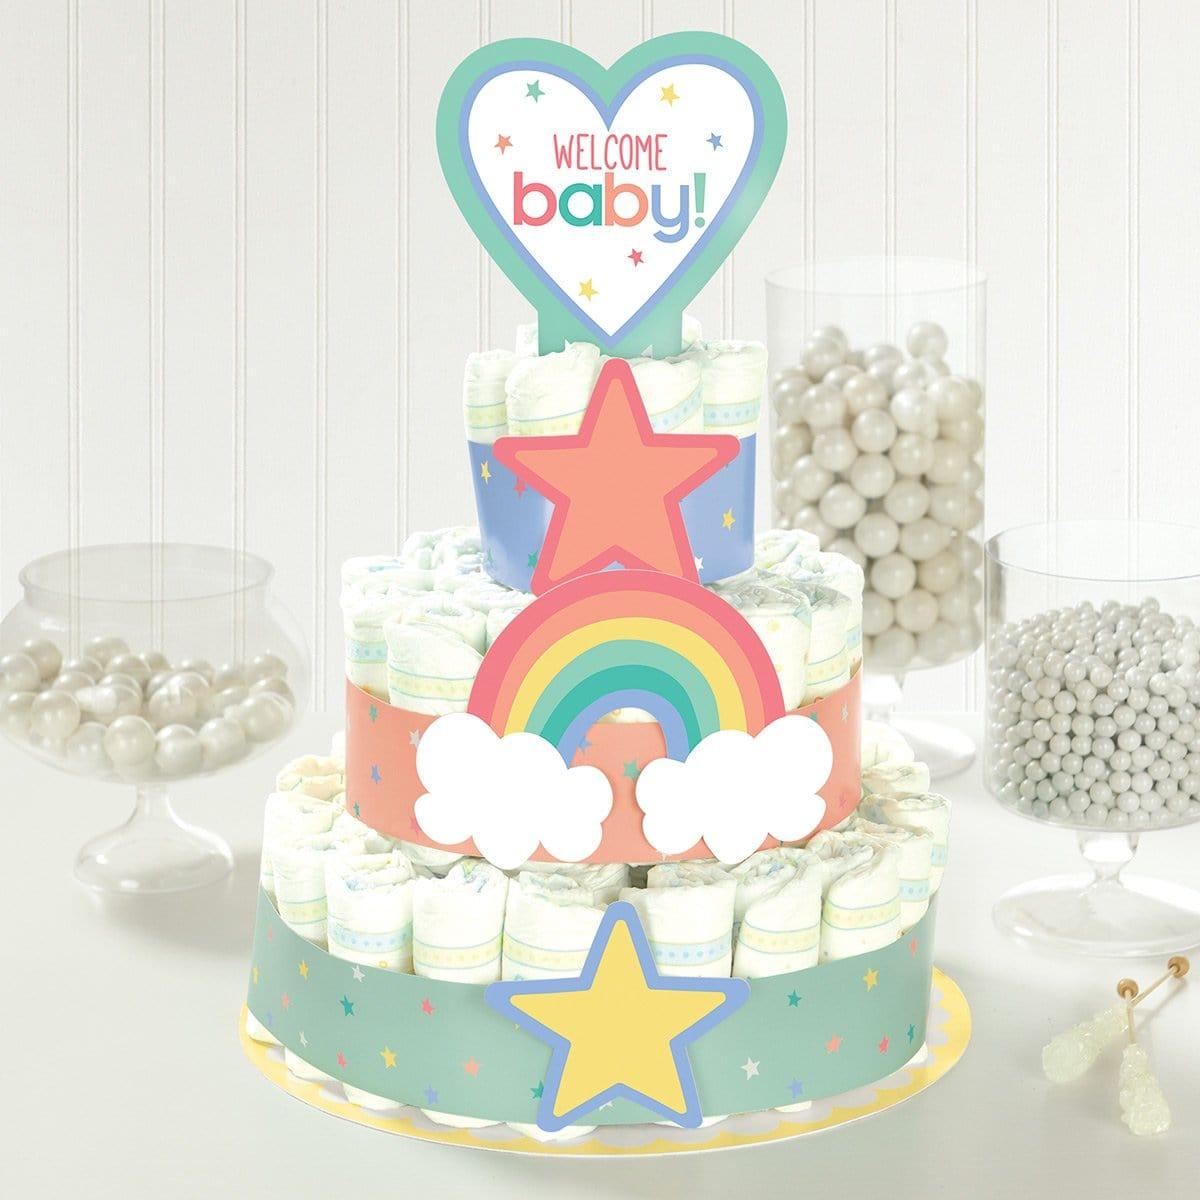 Buy Baby Shower Diaper Cake Kit sold at Party Expert